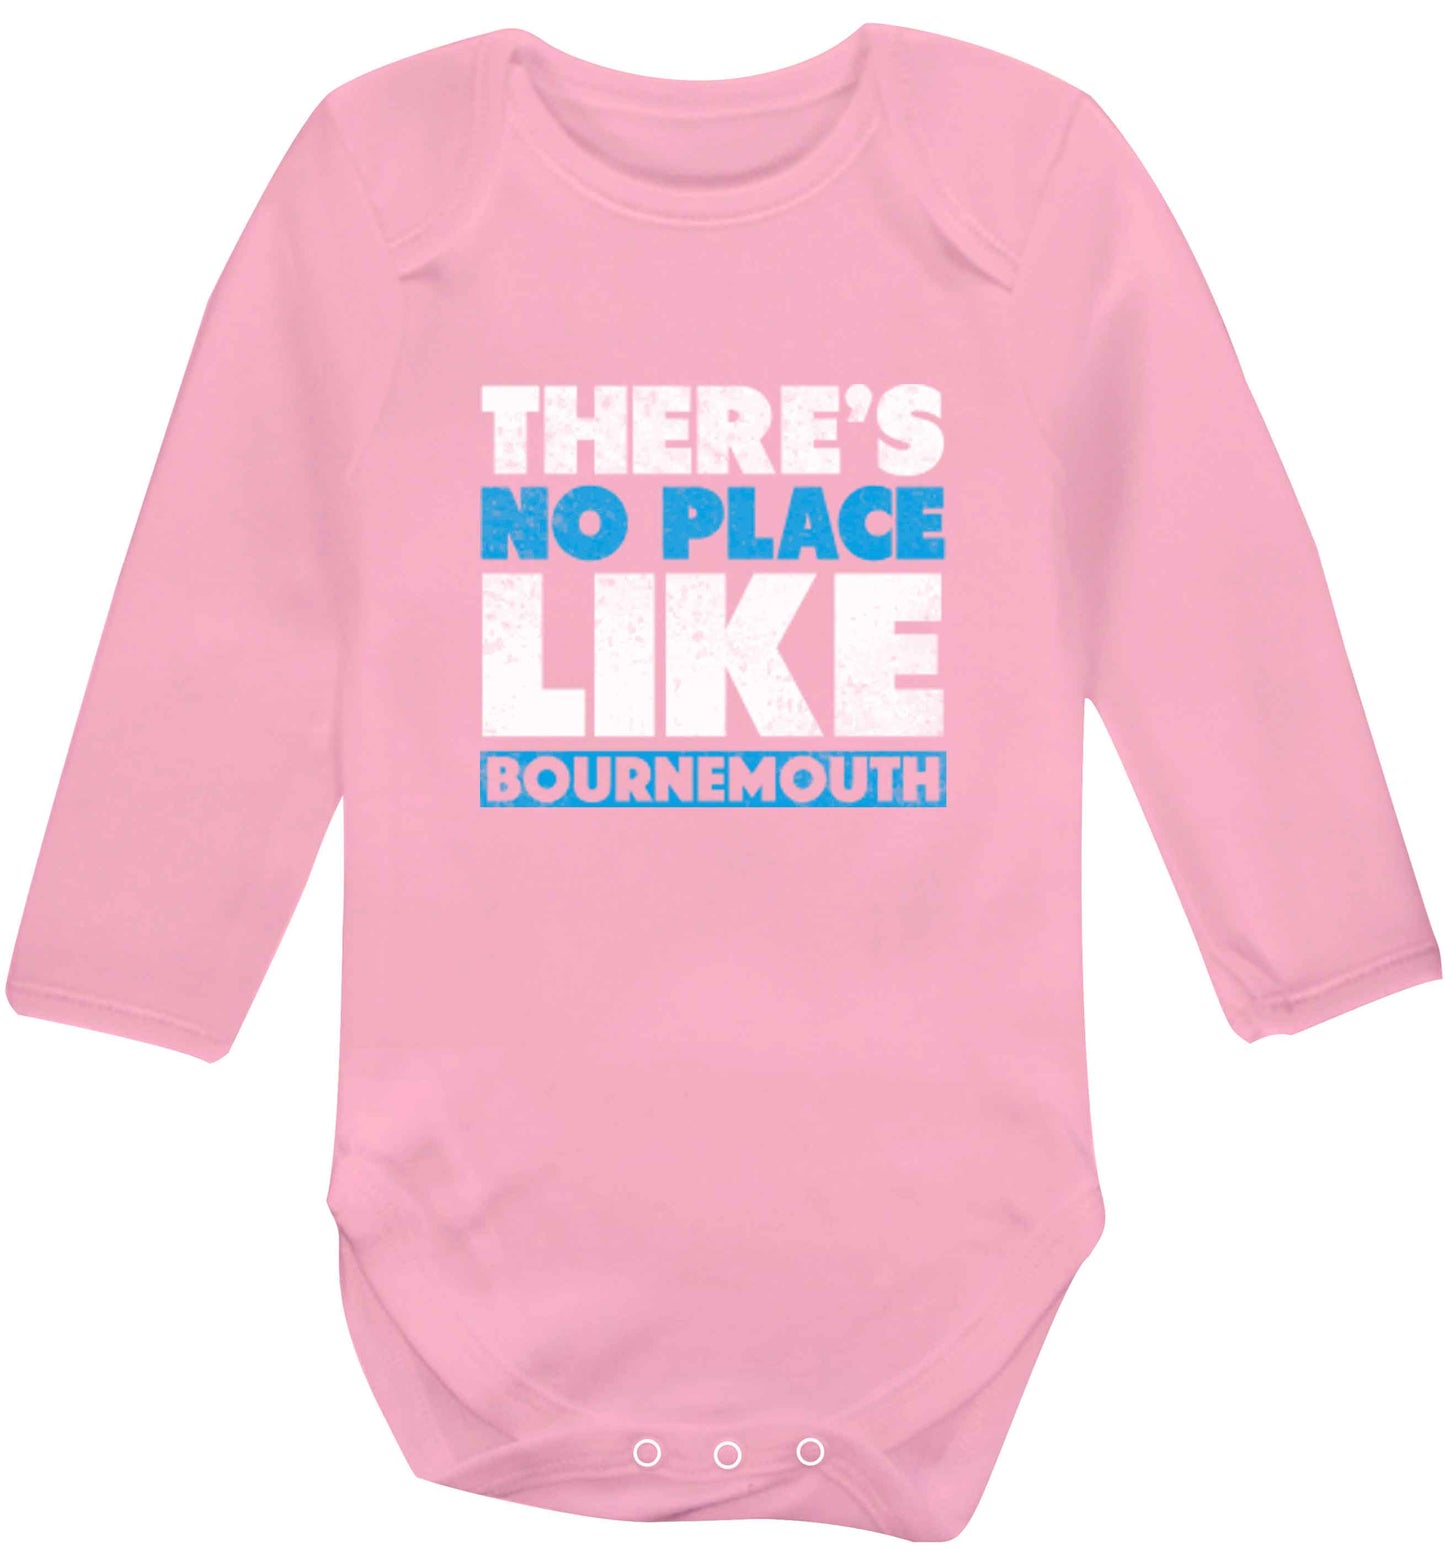 There's no place like Bournemouth baby vest long sleeved pale pink 6-12 months